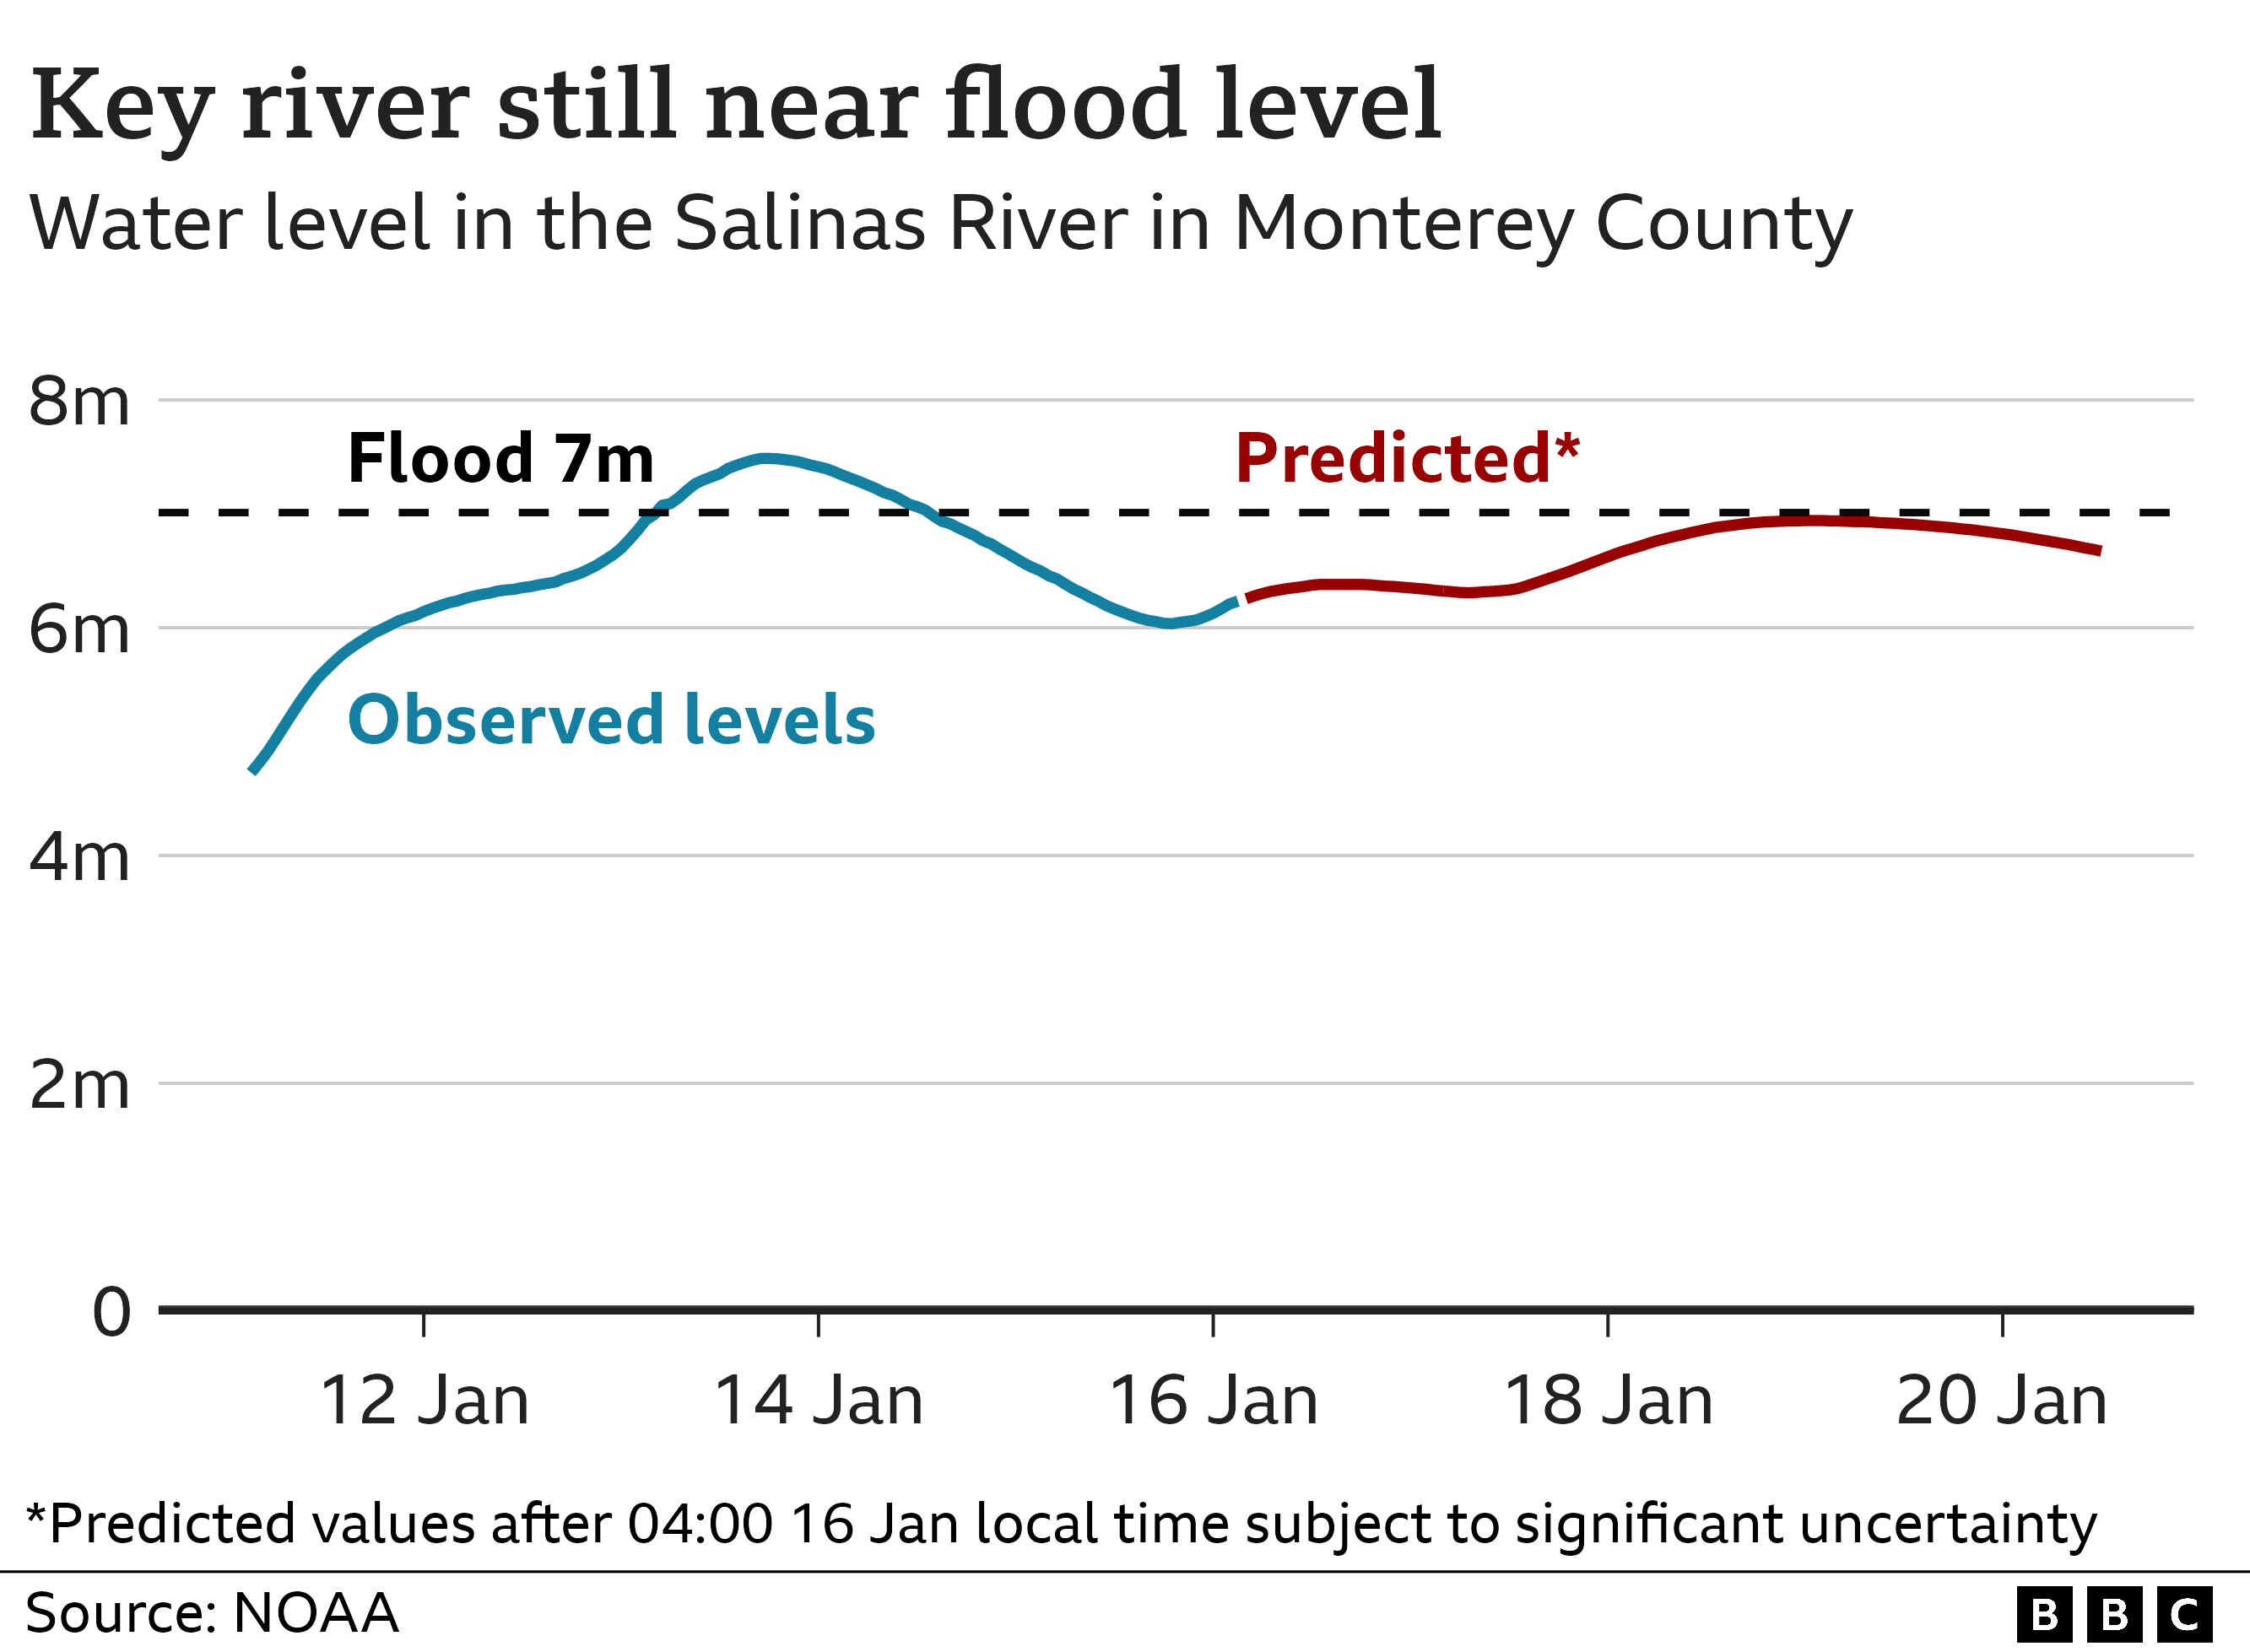 Chart showing water level in the Salinas River